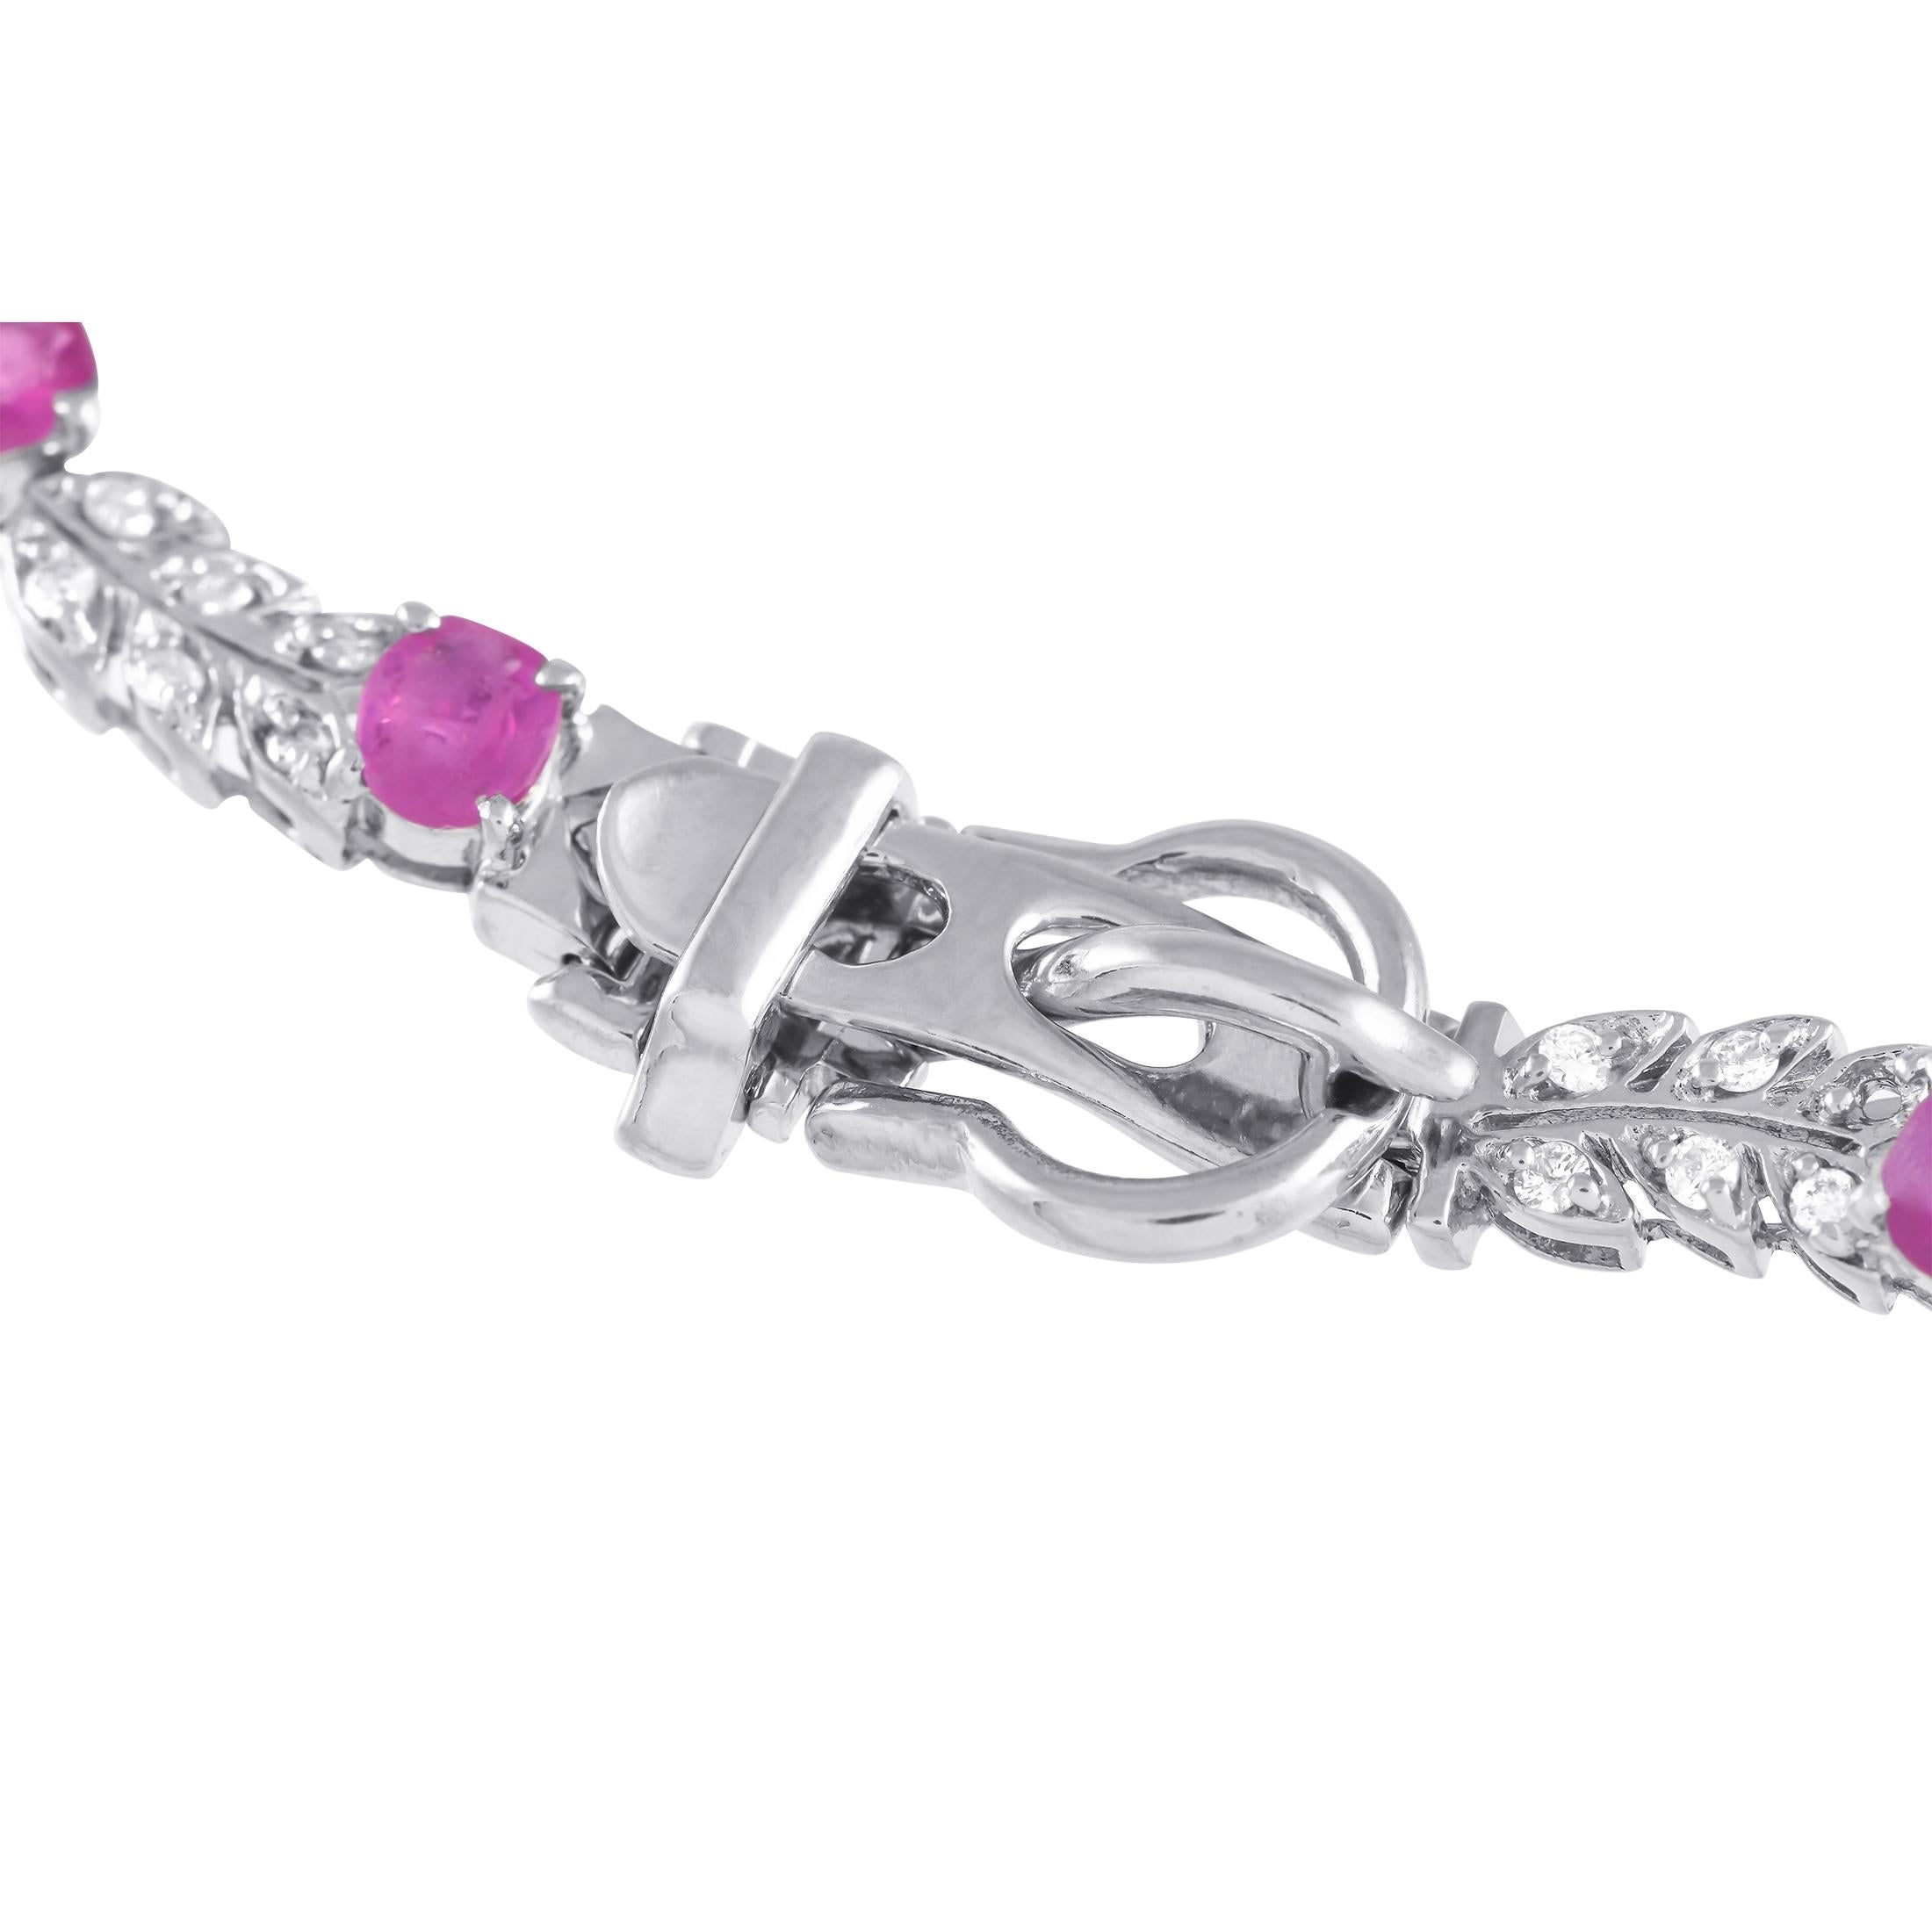 Channel a goddess' graceful beauty with this nature-inspired bracelet in 18K white gold. It features an 8-inch-long chain of leaf stems, with each leaf dotted with a diamond. Oval-cut rubies are positioned at evenly-spaced stations for a touch of